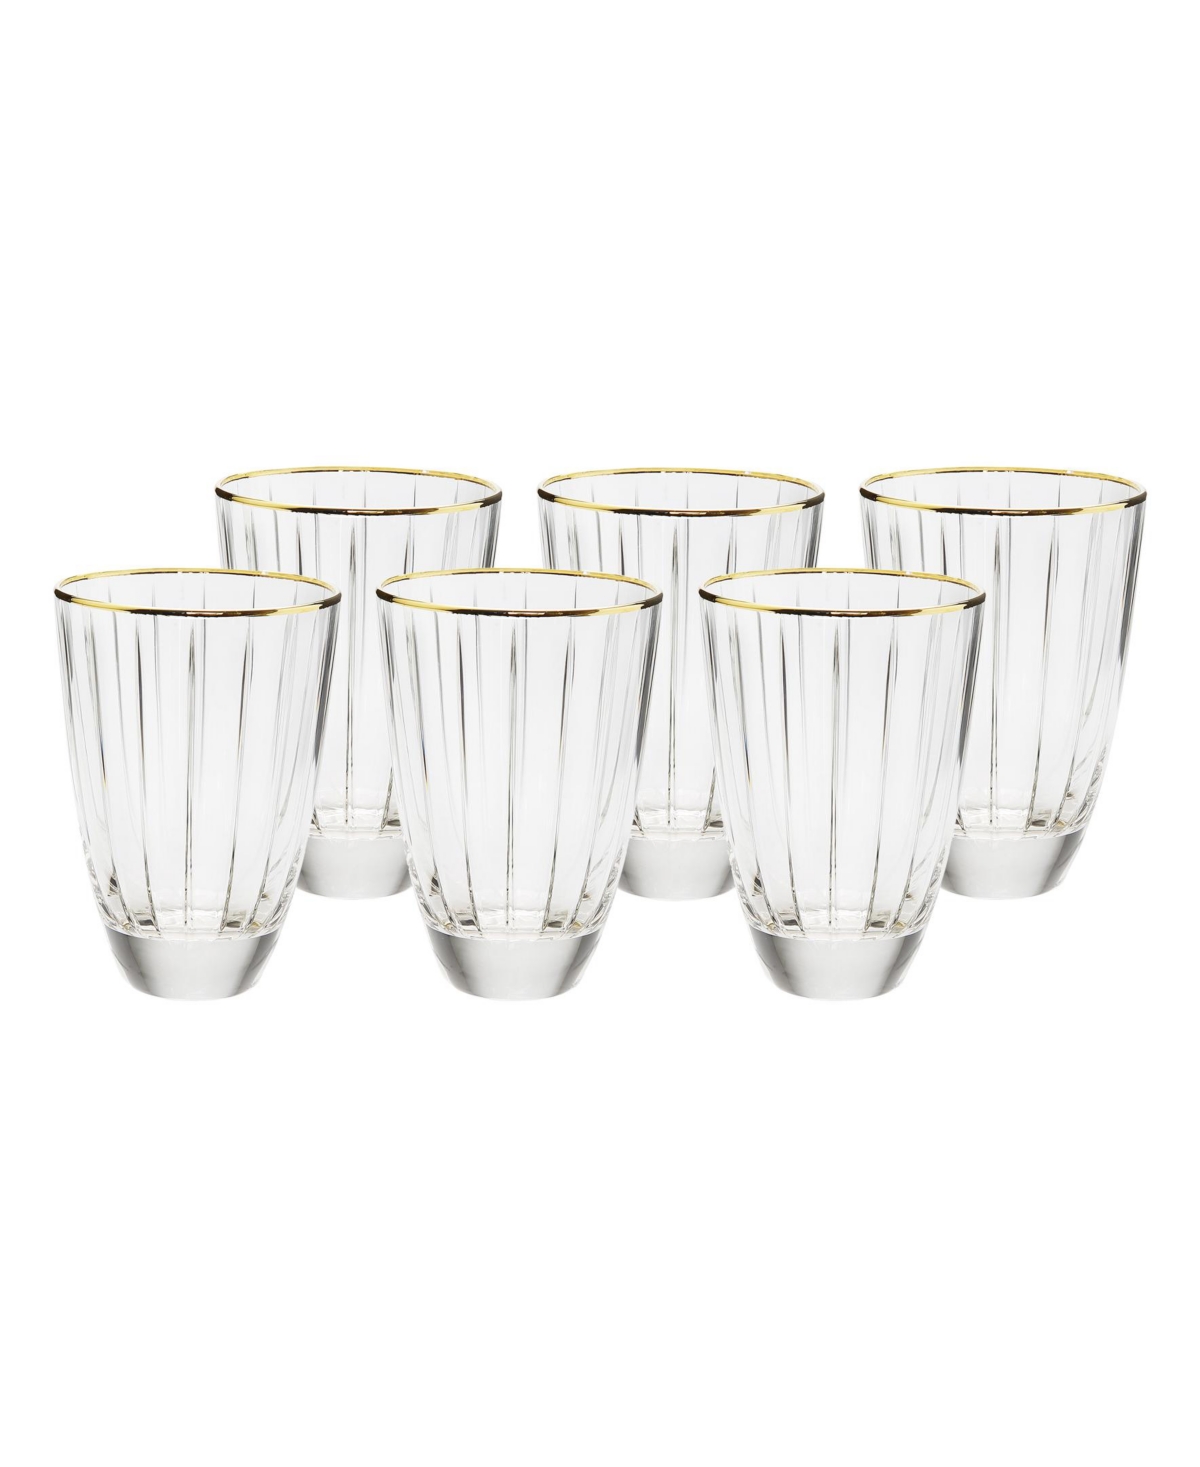 Classic Touch Tumblers With Gold Trim, Set Of 6